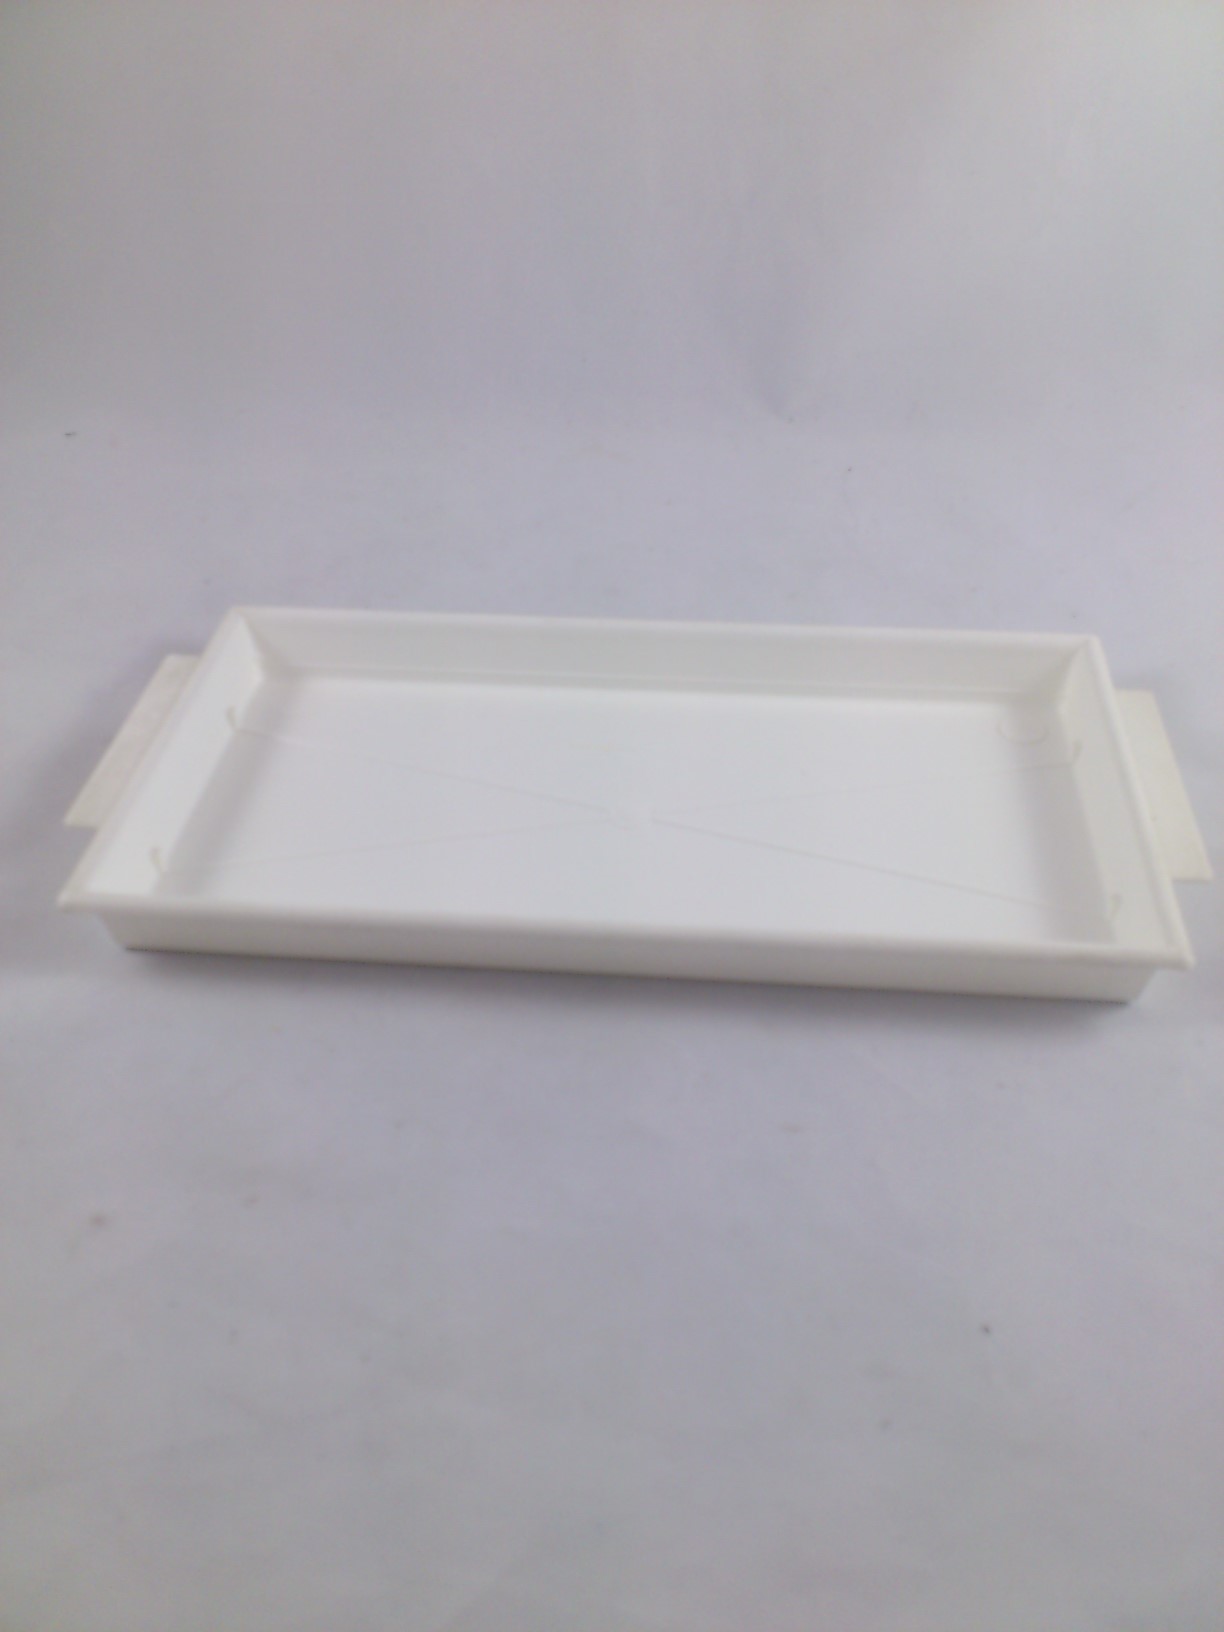 Brick tray 25x13 cm (for 1 brick oasis ideal) white